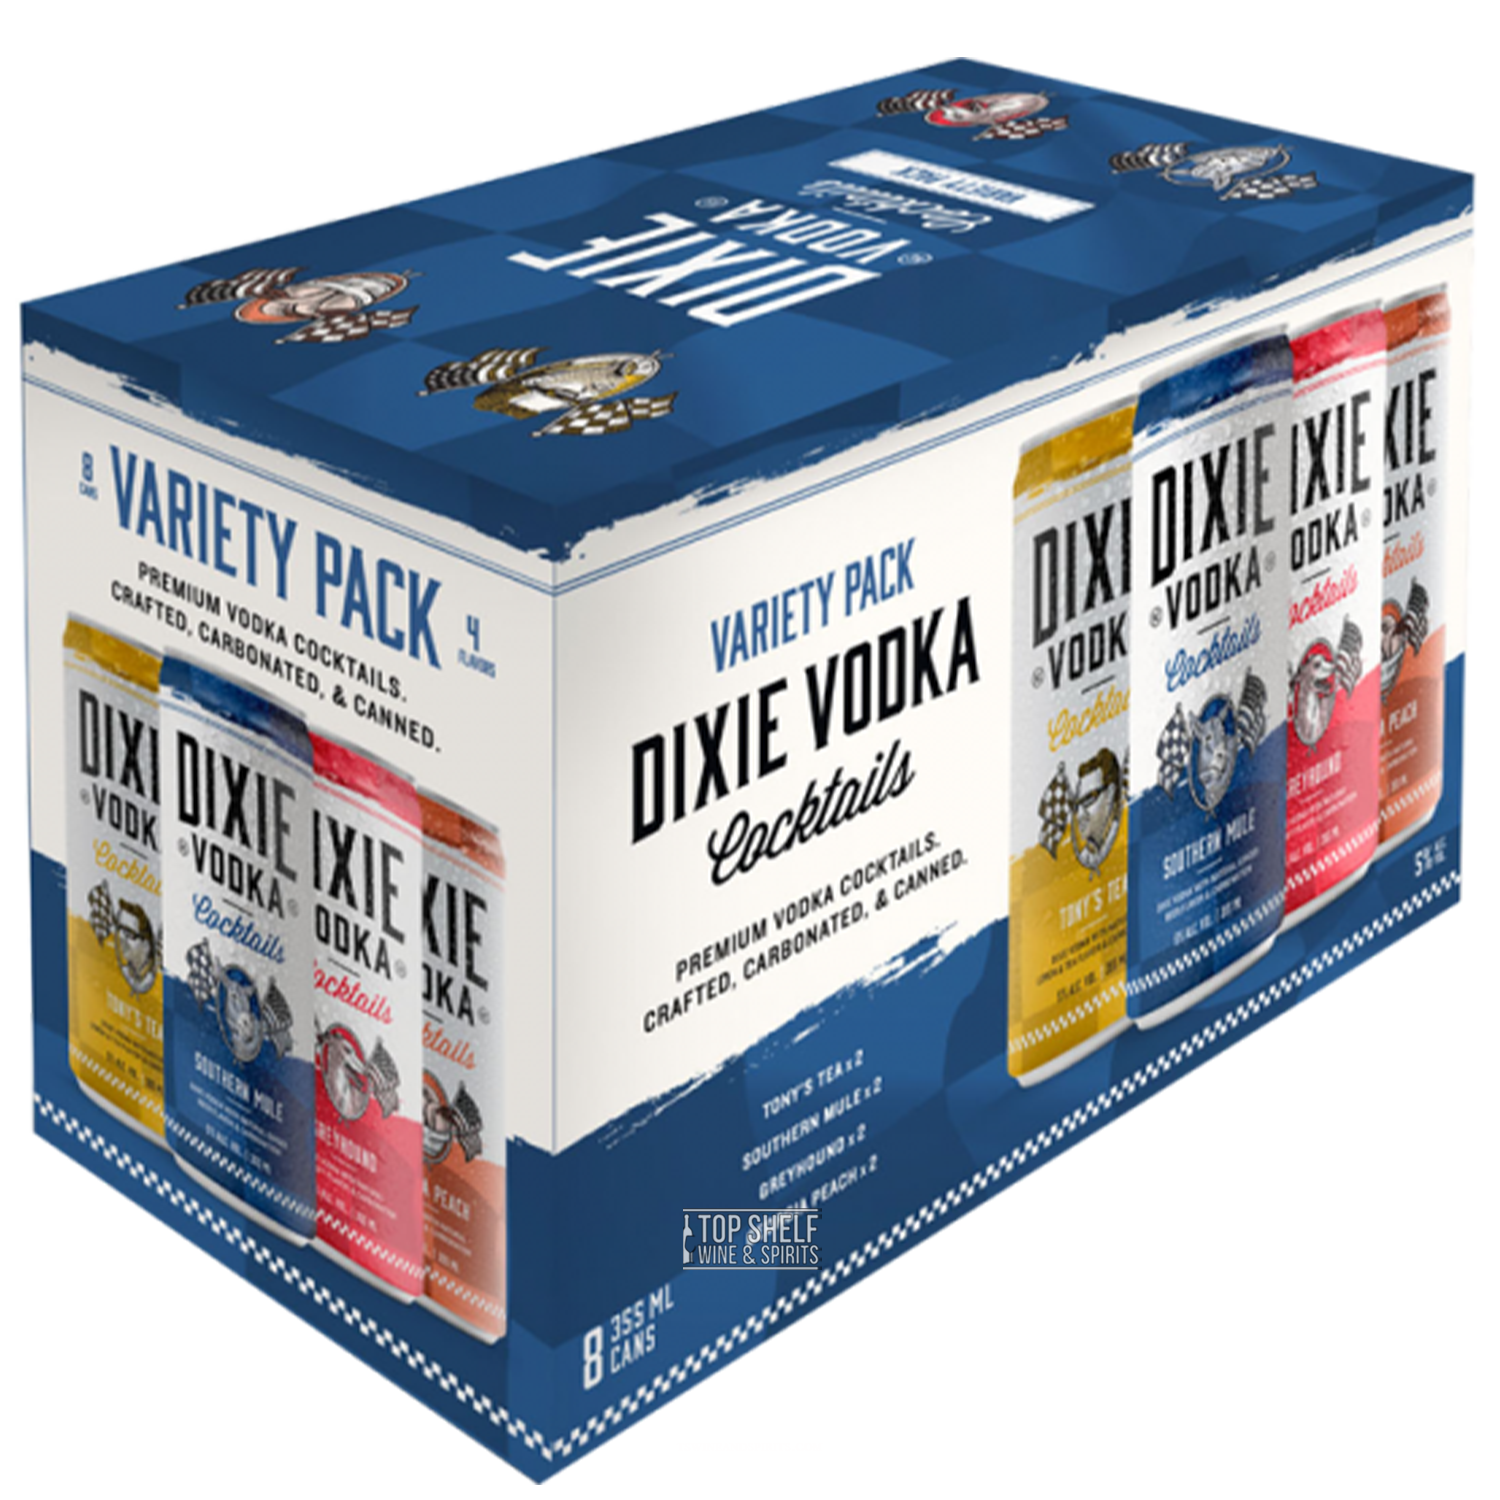 Dixie Vodka Cocktails Variety Pack (8 Cans)